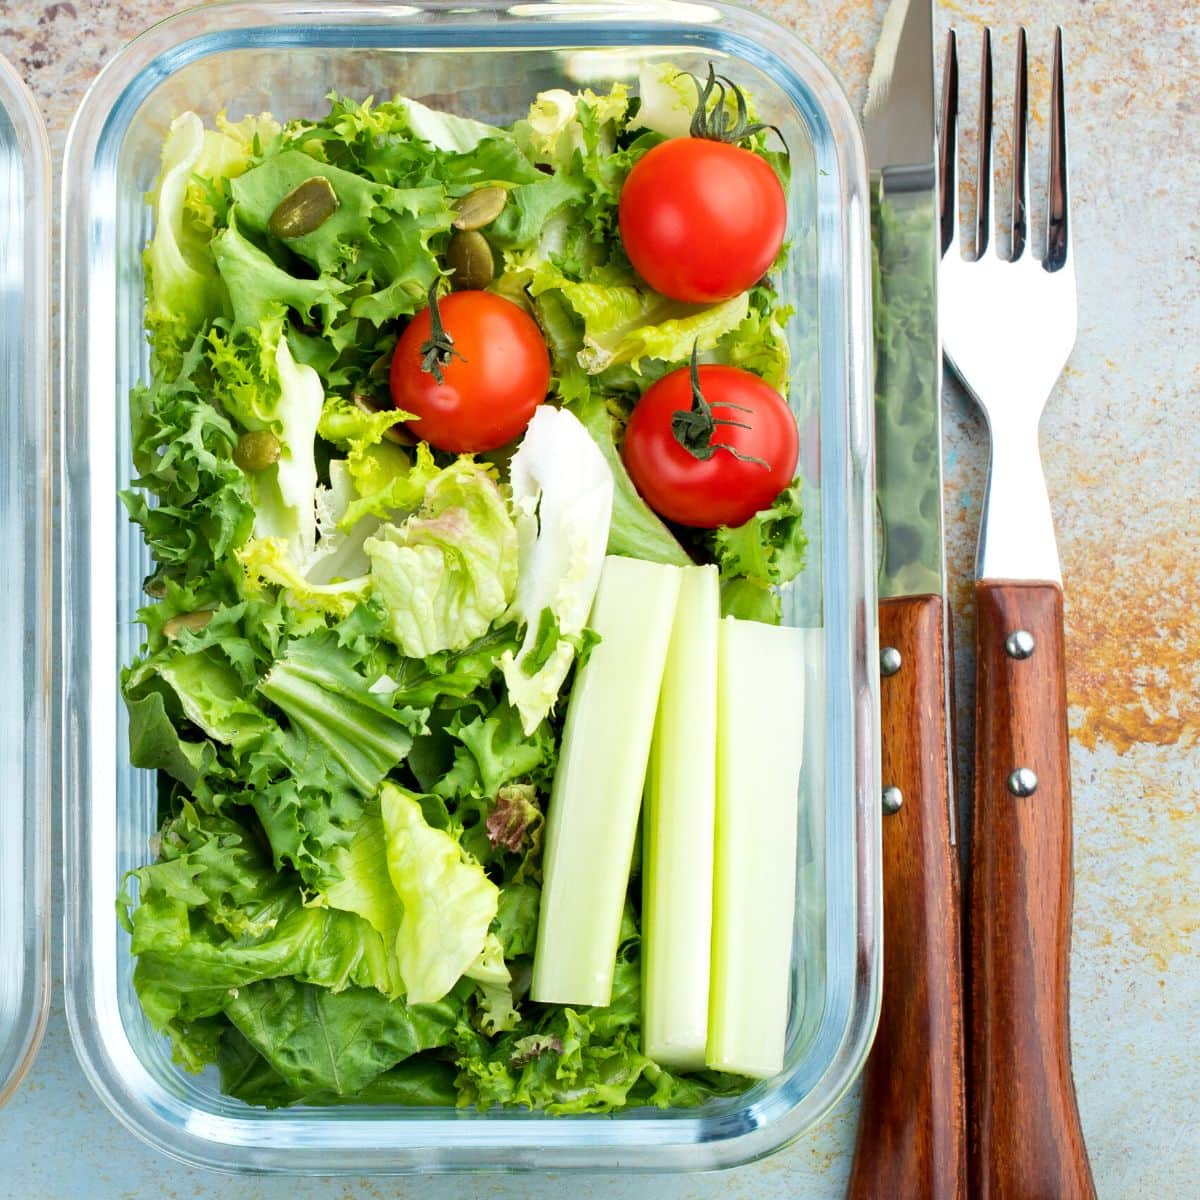 An open glass storage container filled with salad.